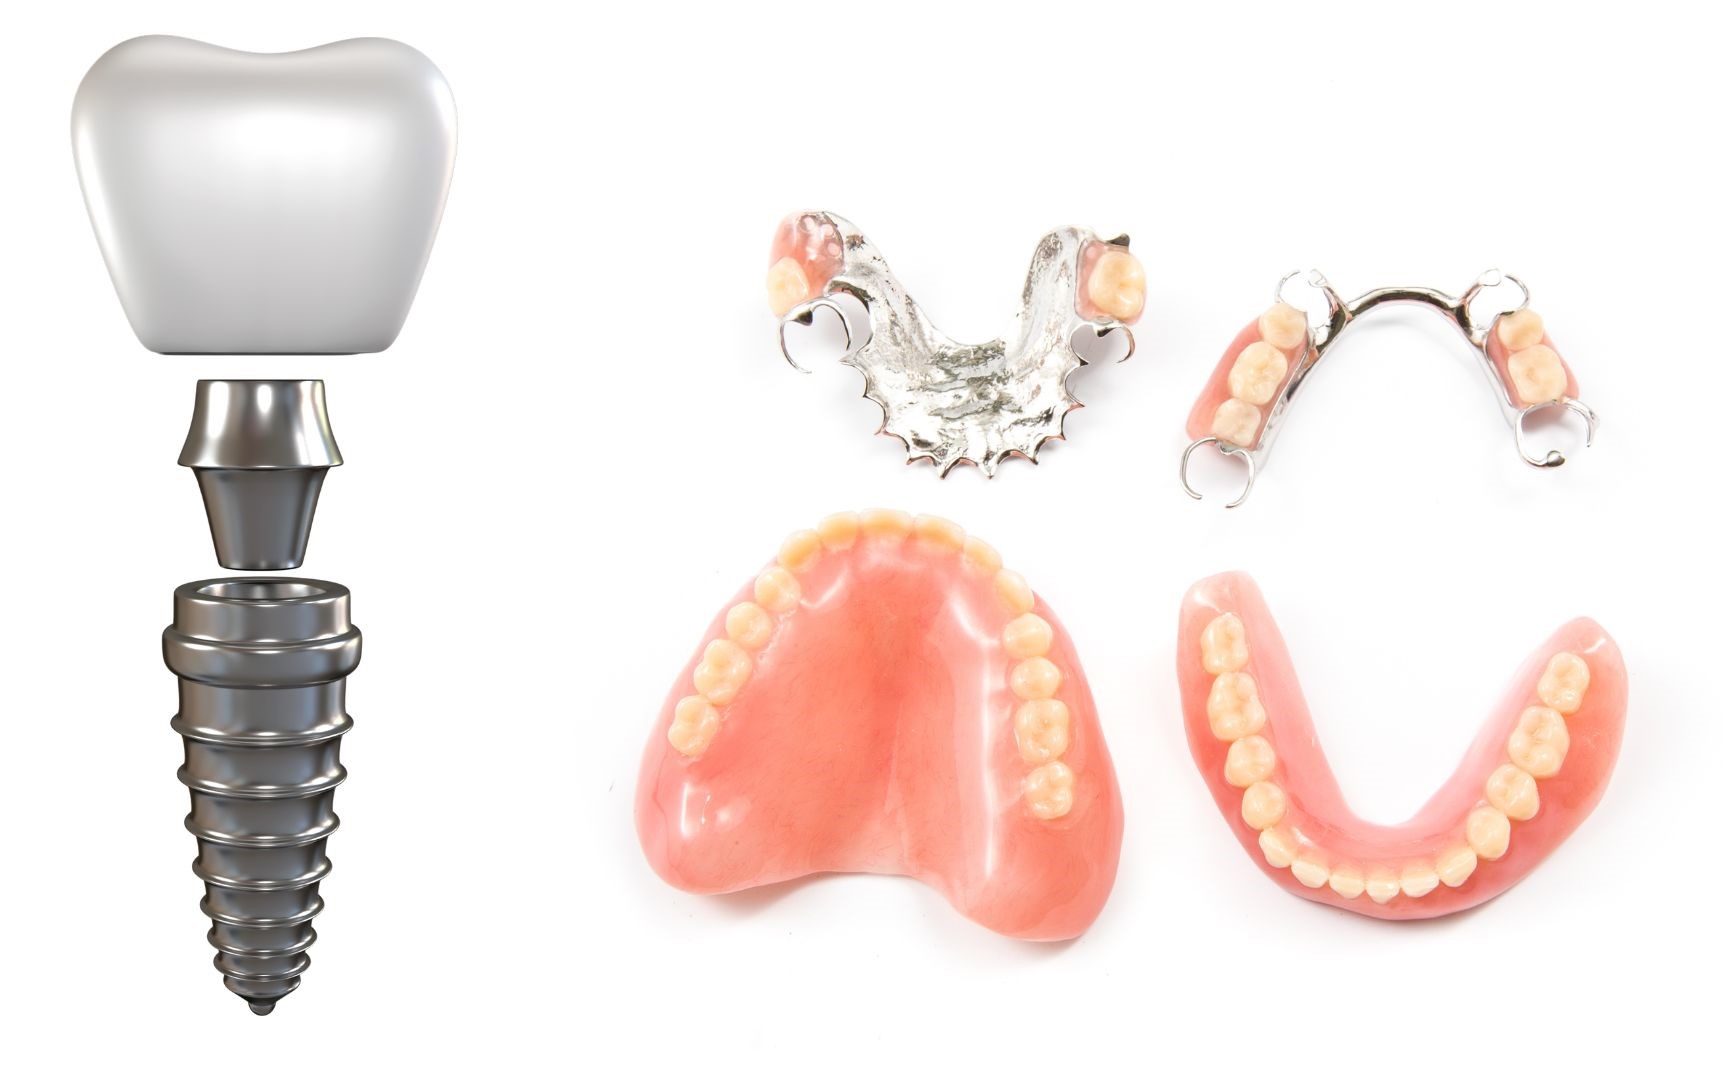 Main differences between a prosthesis and a dental implant Turkey, Istanbul